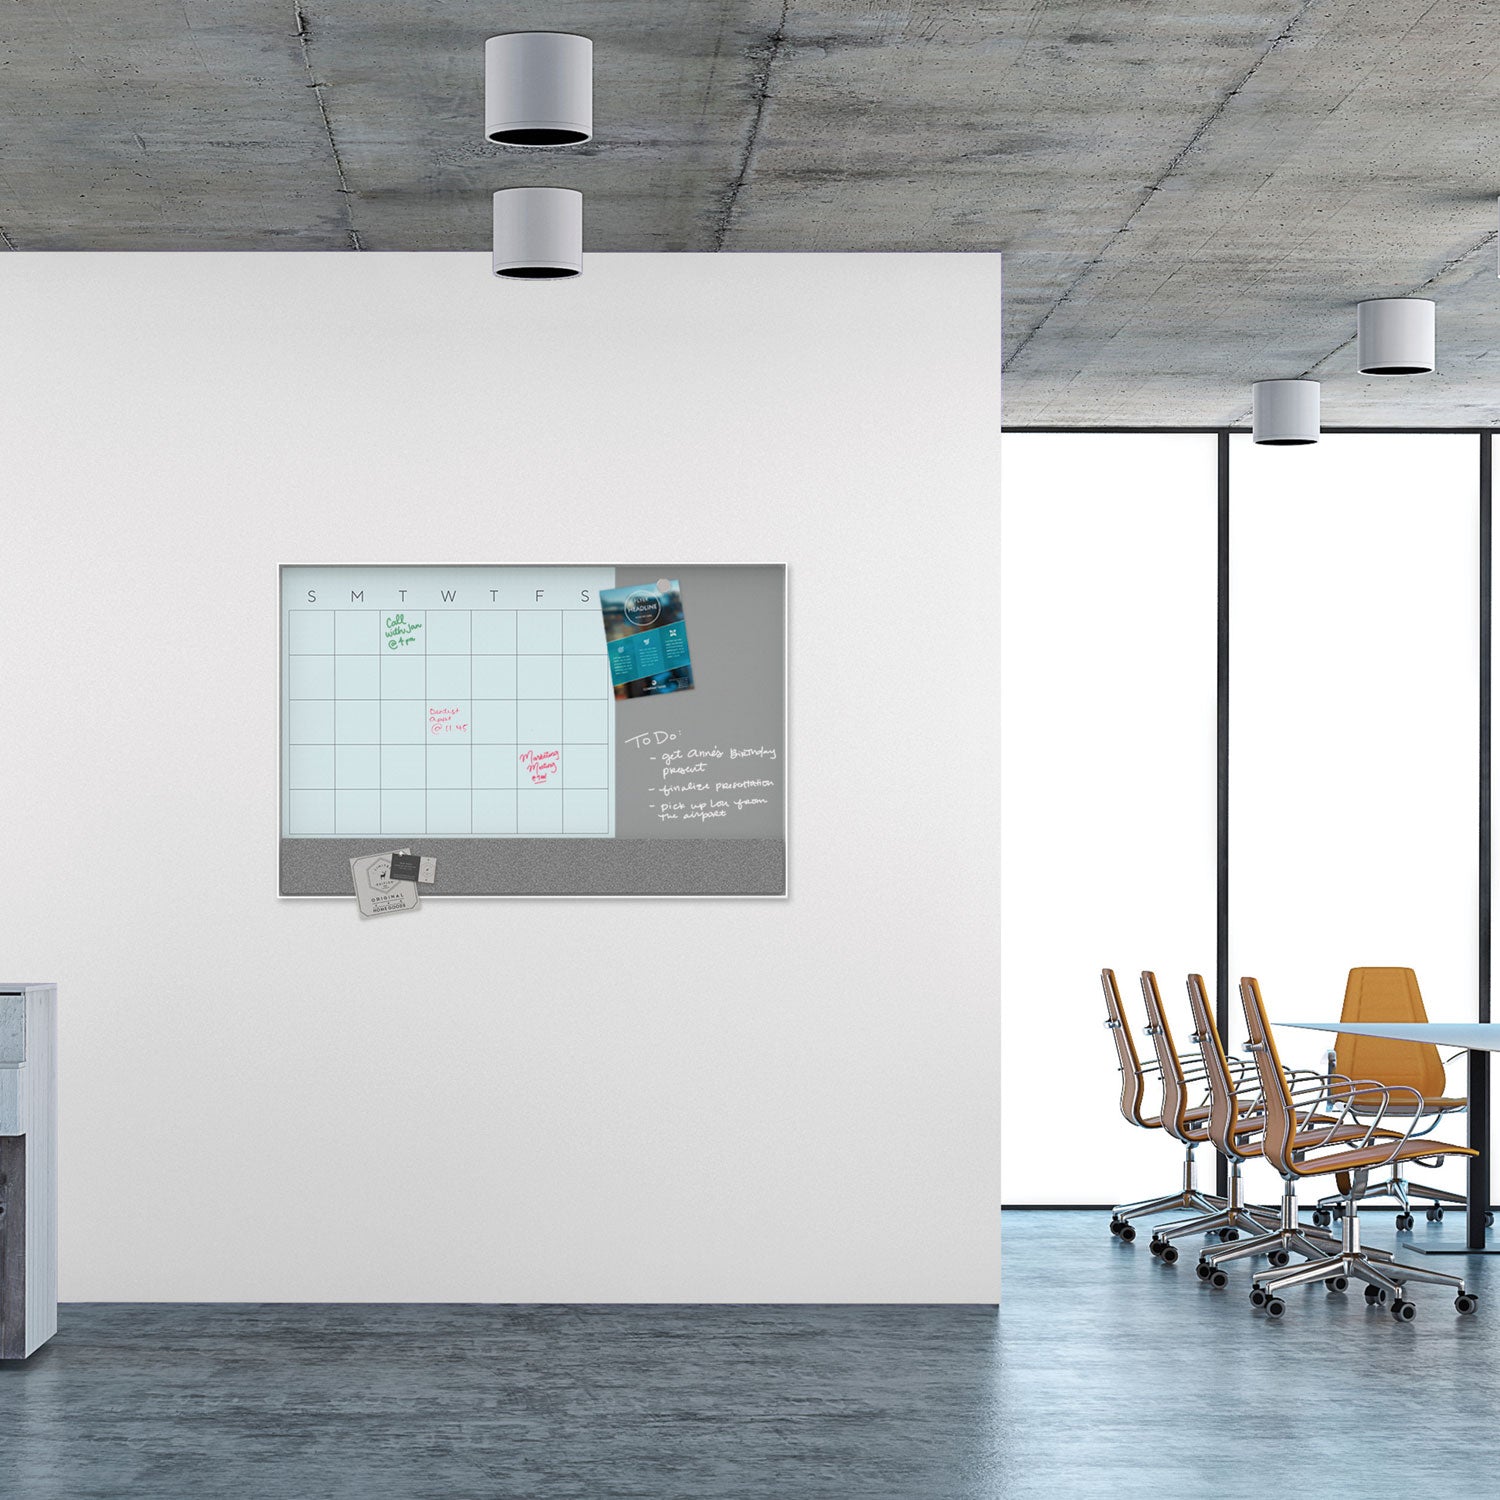 3n1-magnetic-glass-dry-erase-combo-board-47-x-35-month-view-gray-white-surface-white-aluminum-frame_ubr3198u0001 - 2